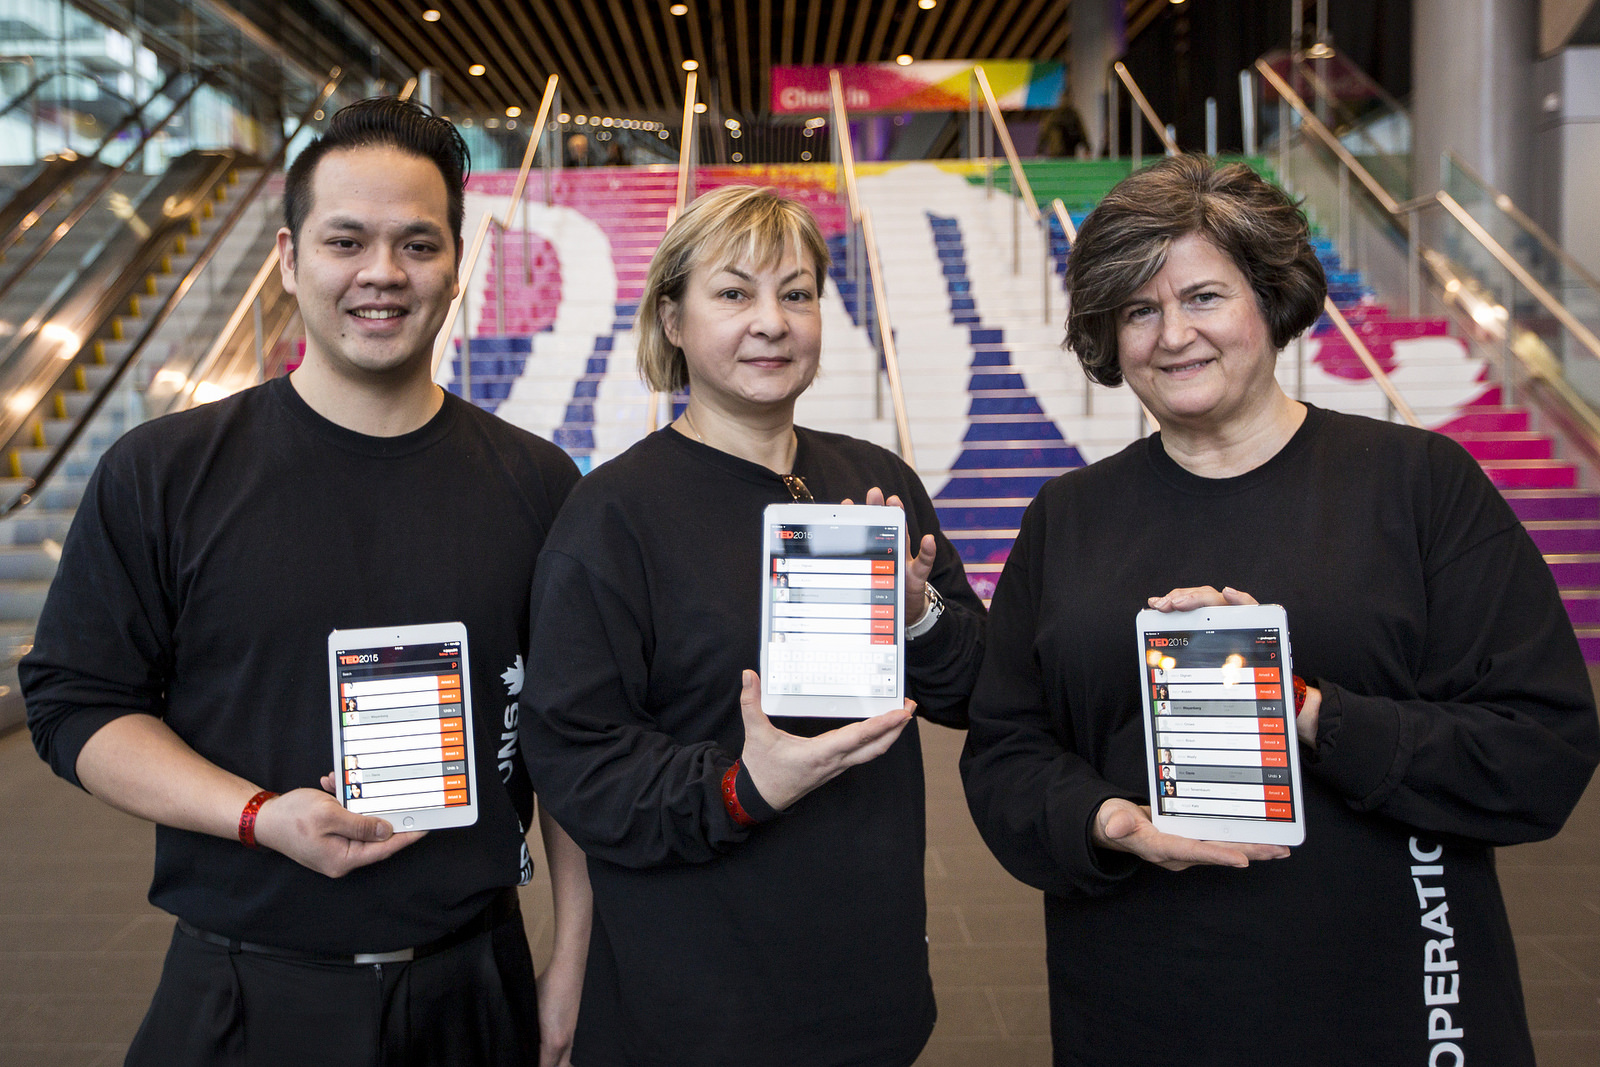 At our registration desk, an app helps volunteers know when attendees have arrived. These volunteers pose in front of the "Dare" stairs, at the entrance to TED2015. Photo: Ryan Lash/TED